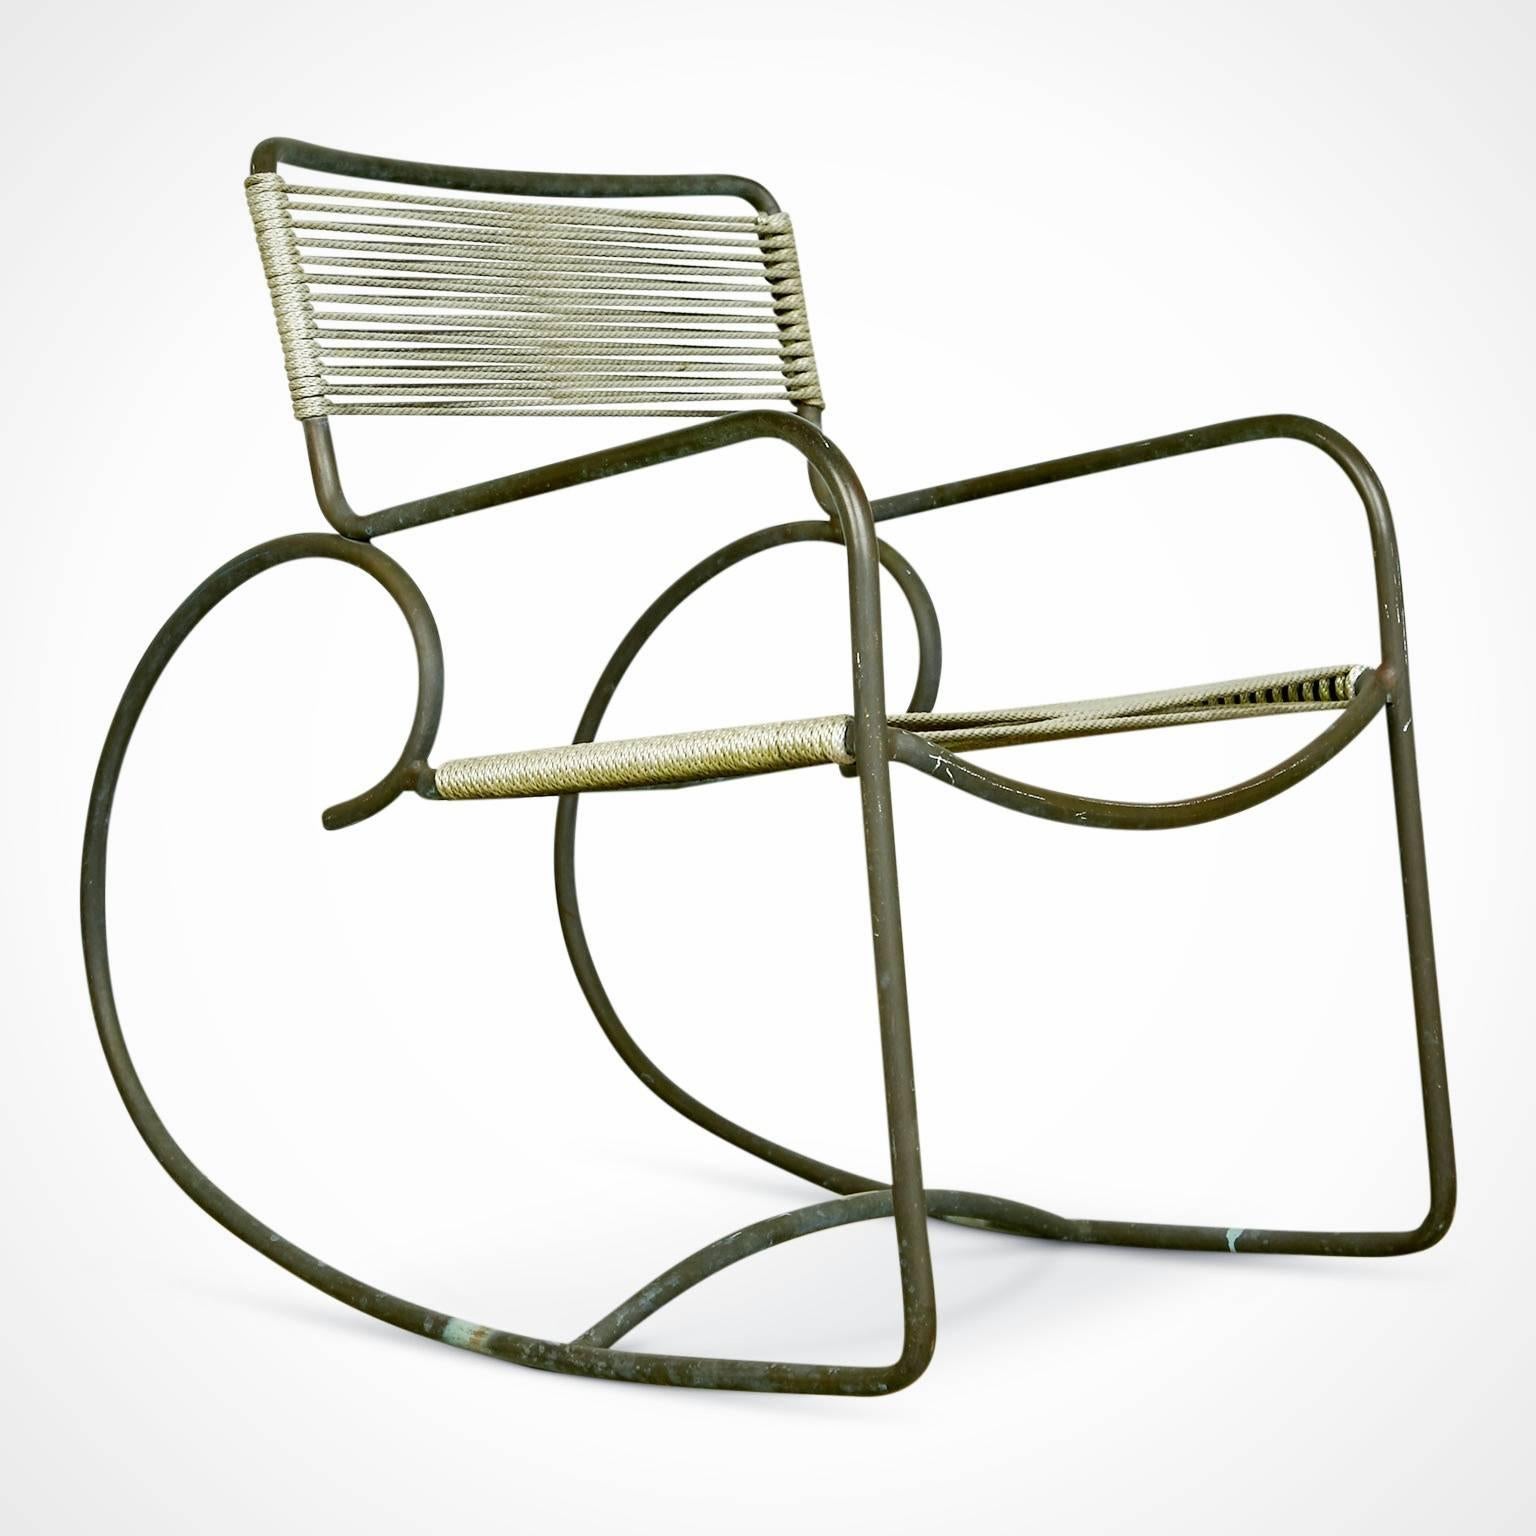 Bronze rocking chair designed by Walter Lamb and manufactured by Brown Jordan. A rarity with the original label still in-tact as these, being usually used outdoors, tend to lose the labels on the lower cross-bar. This, plus its excellent original